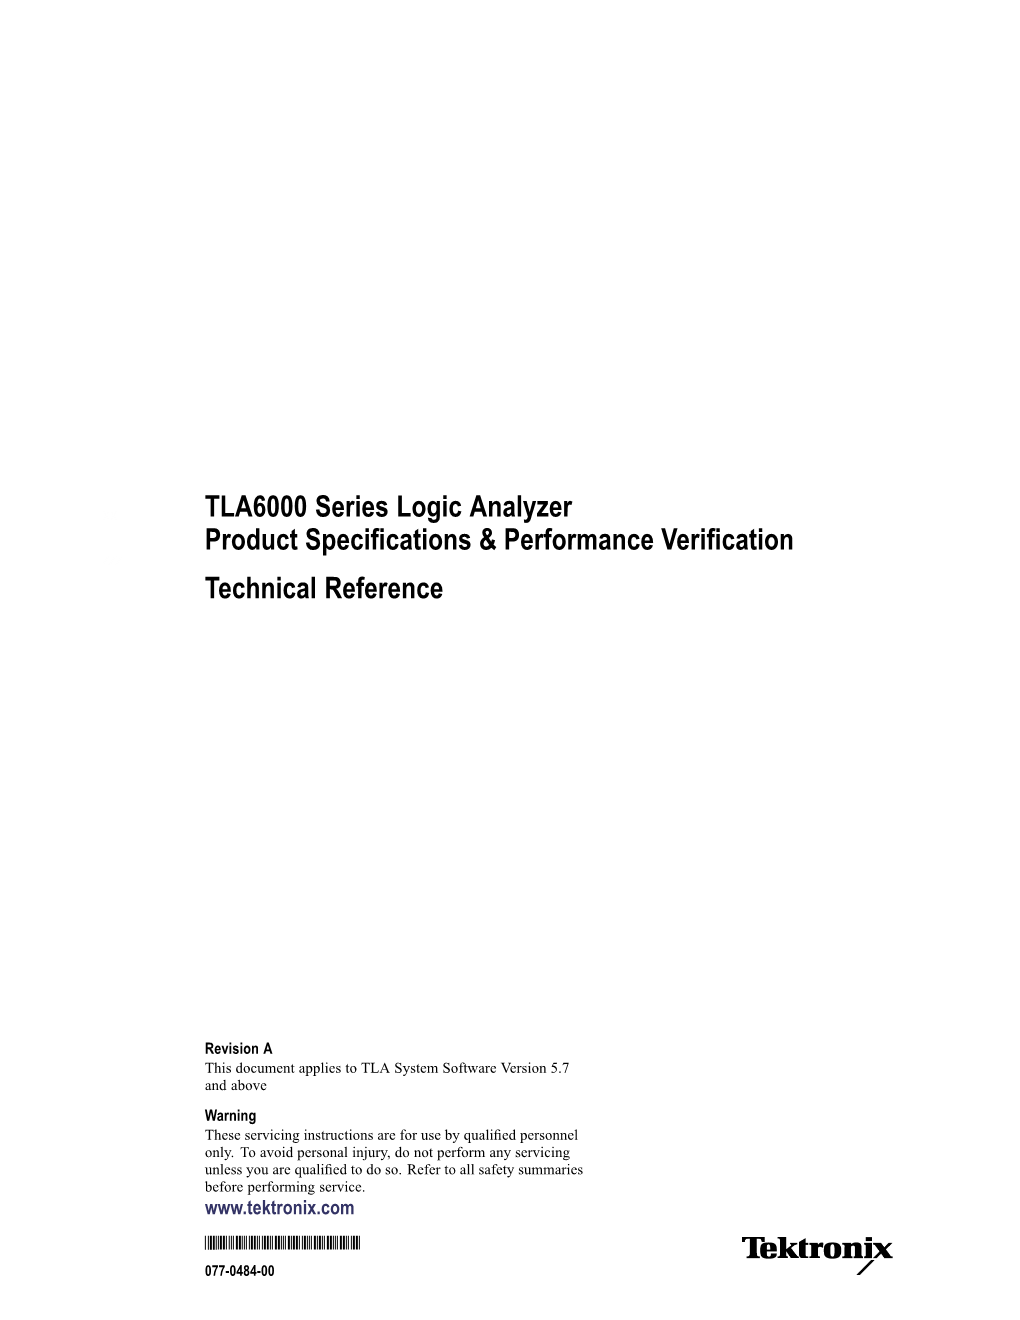 TLA6000 Series Logic Analyzer Product Specifications